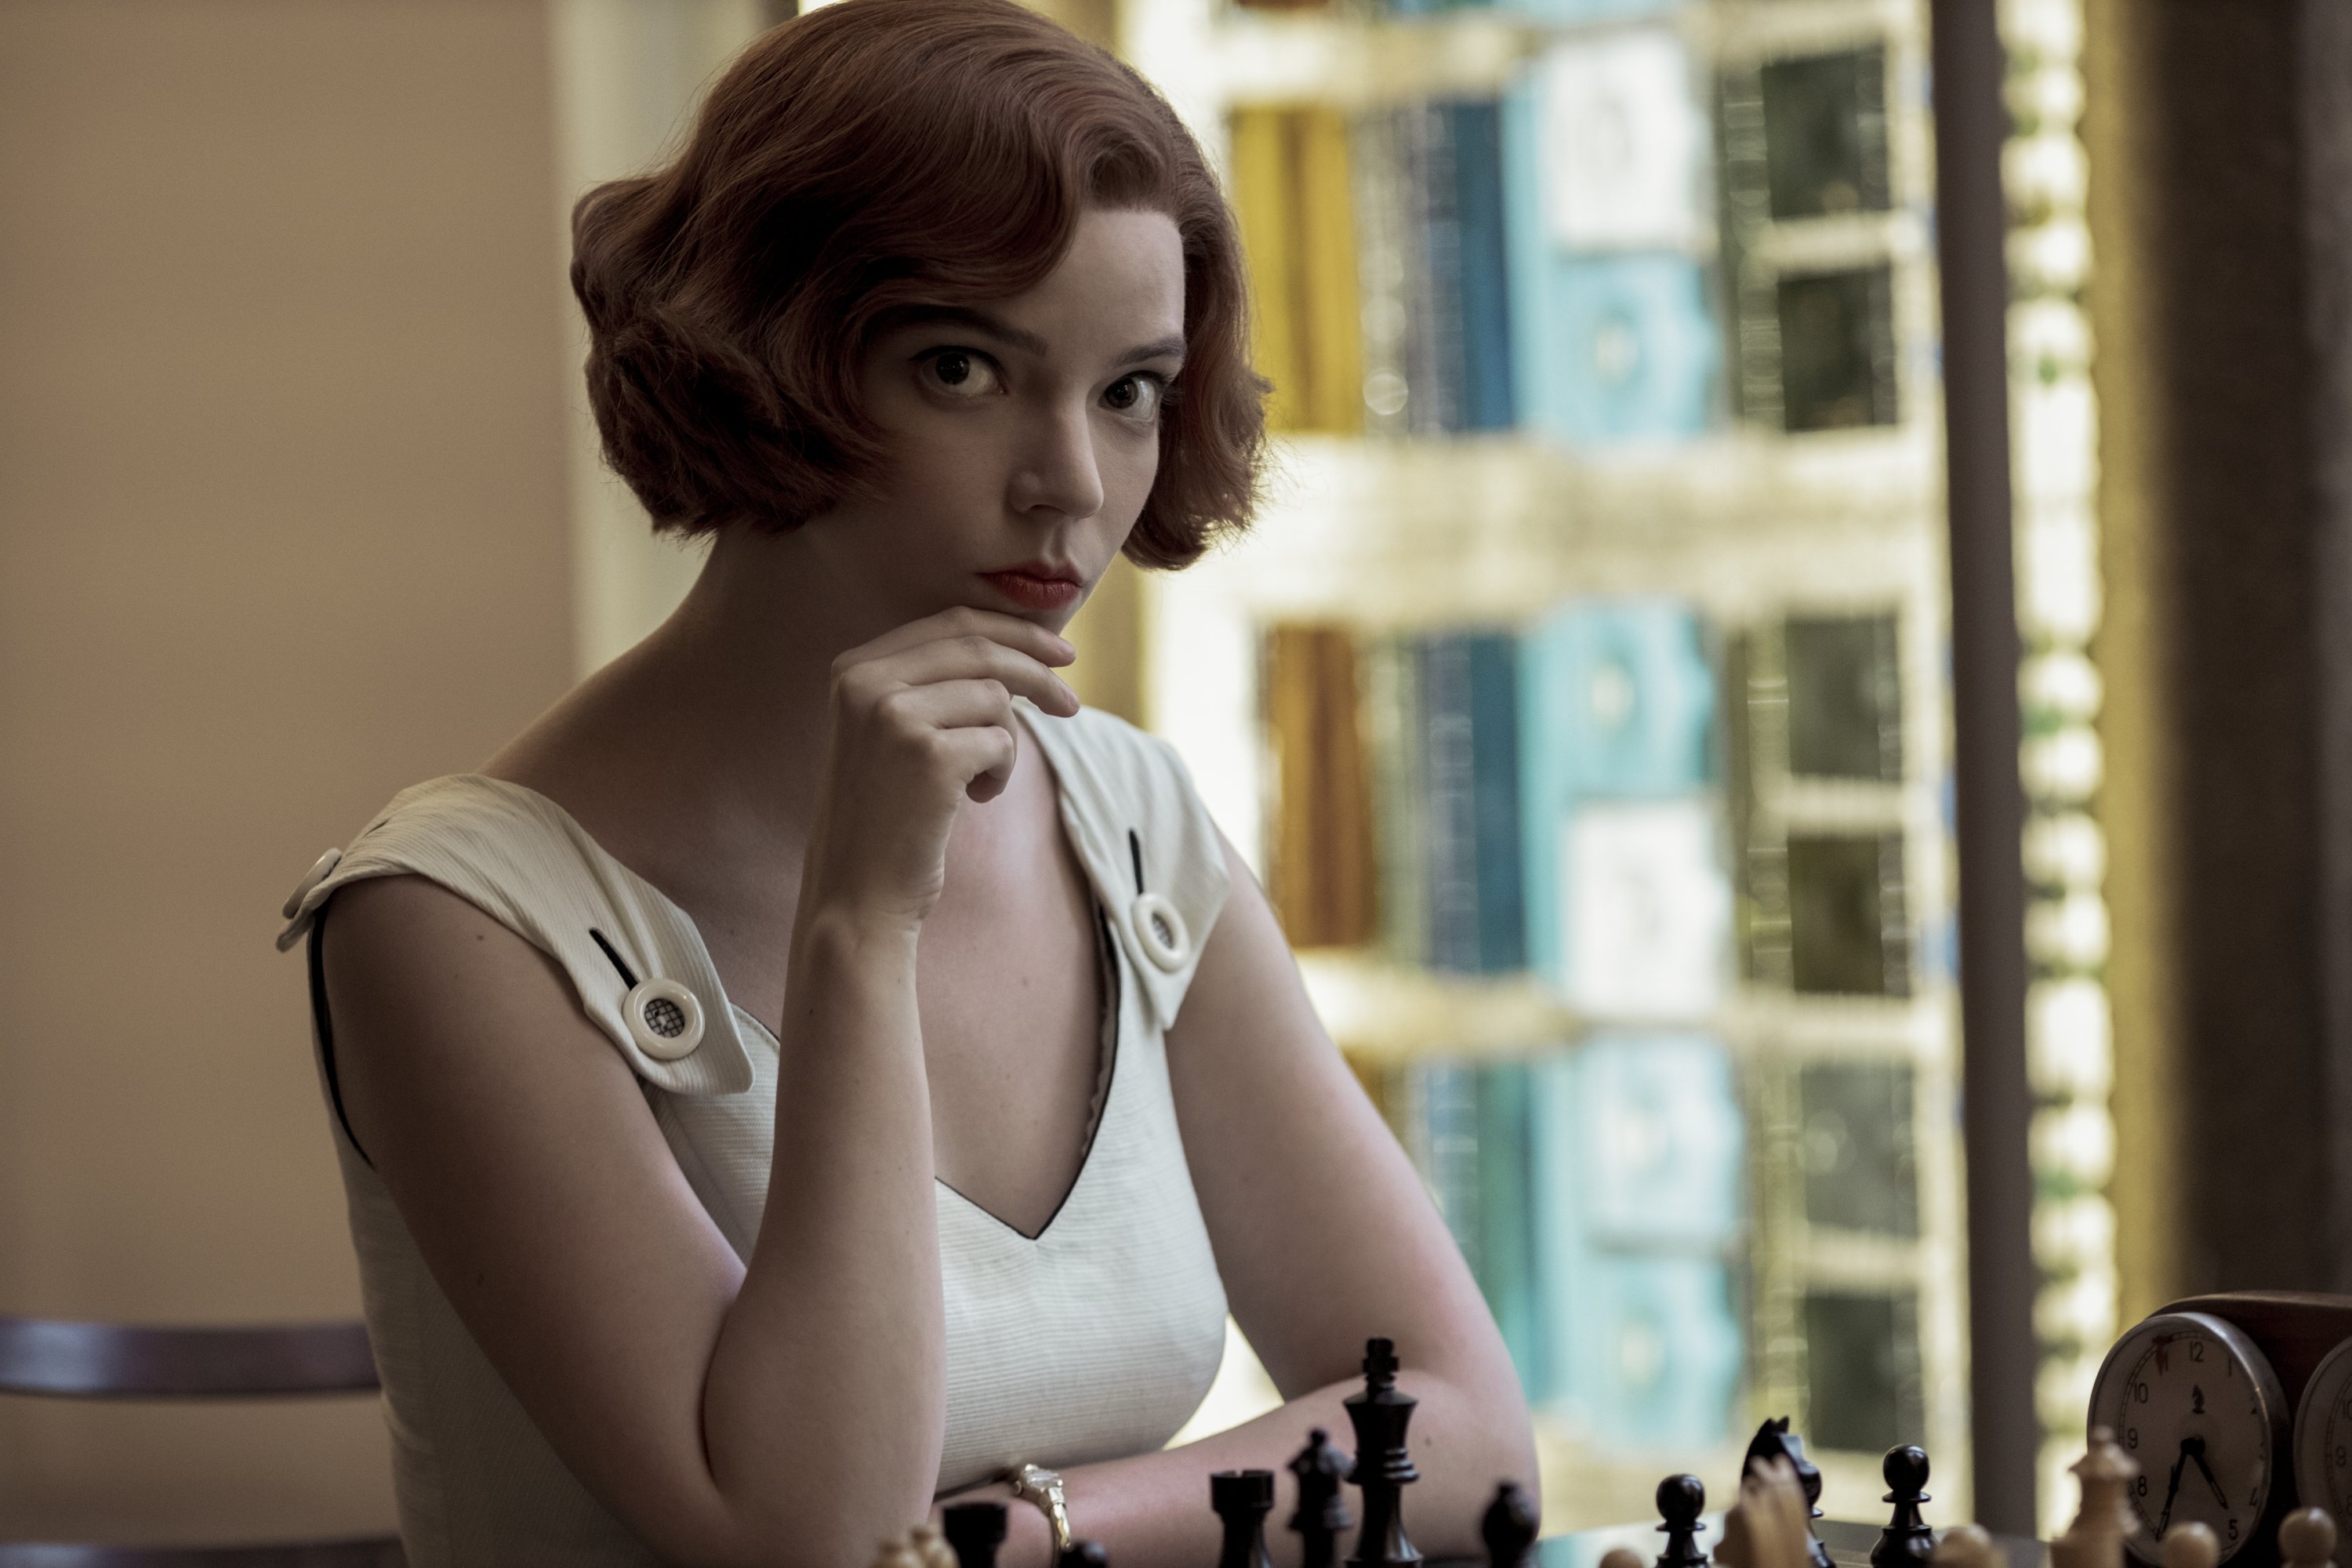 A still shot from 'The Queen's Gambit' where Anya Taylor-Joy's character thinks before making her next move in a chess match. (Netflix via AP)